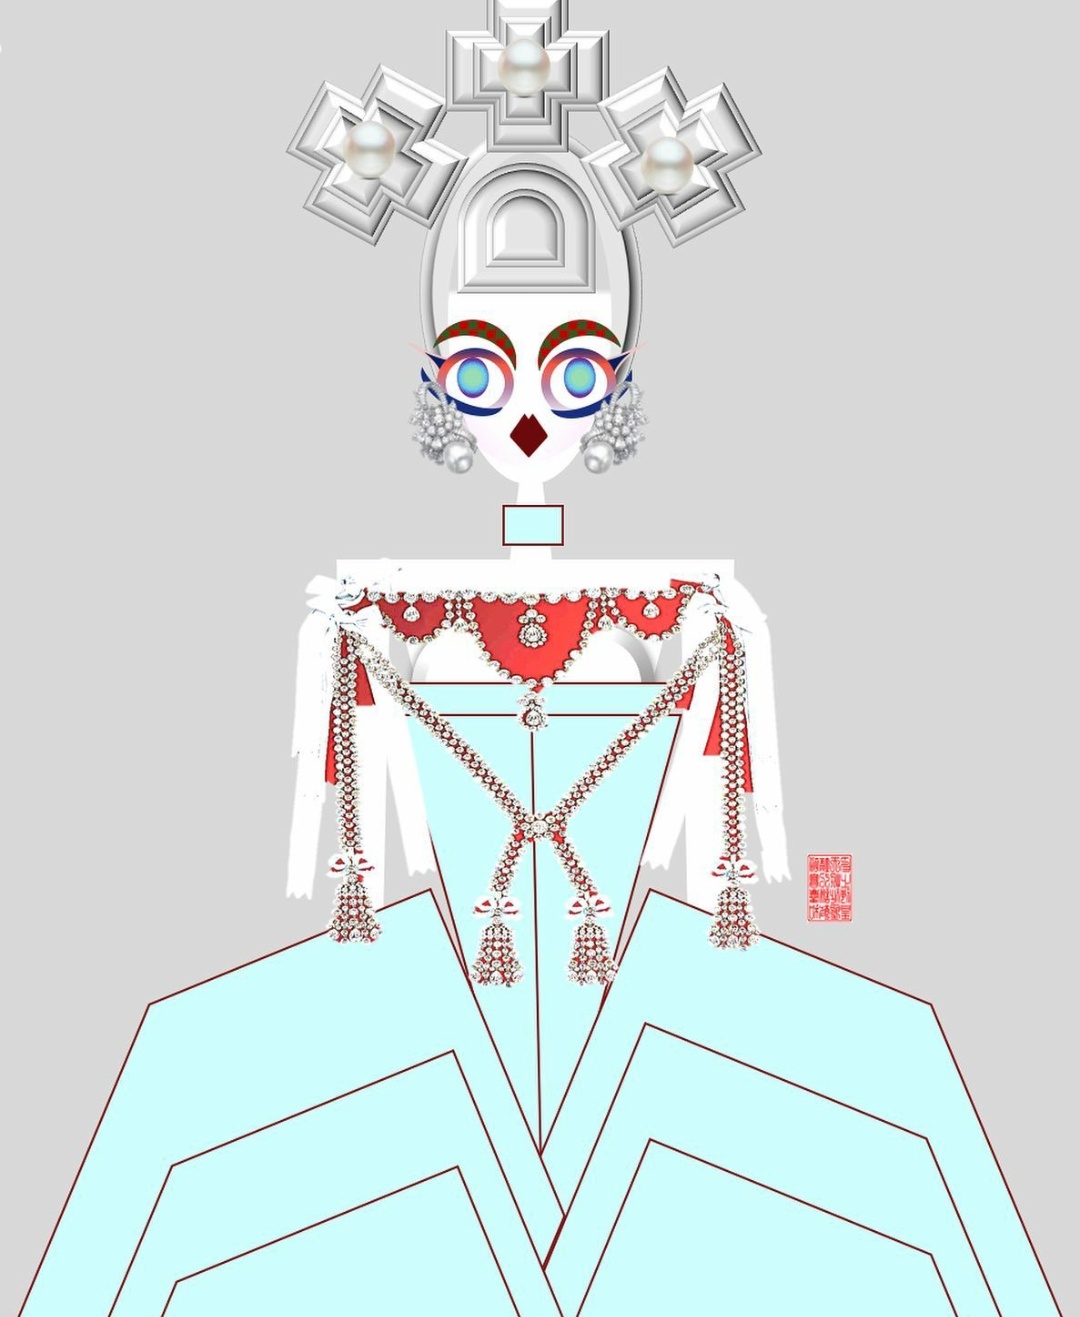 Unfinished piece. Was drawing screech from roblox doors but w a body and  holding a head cuz cool lol. Probably not gonna get around to finishing it  lol : r/DigitalArt